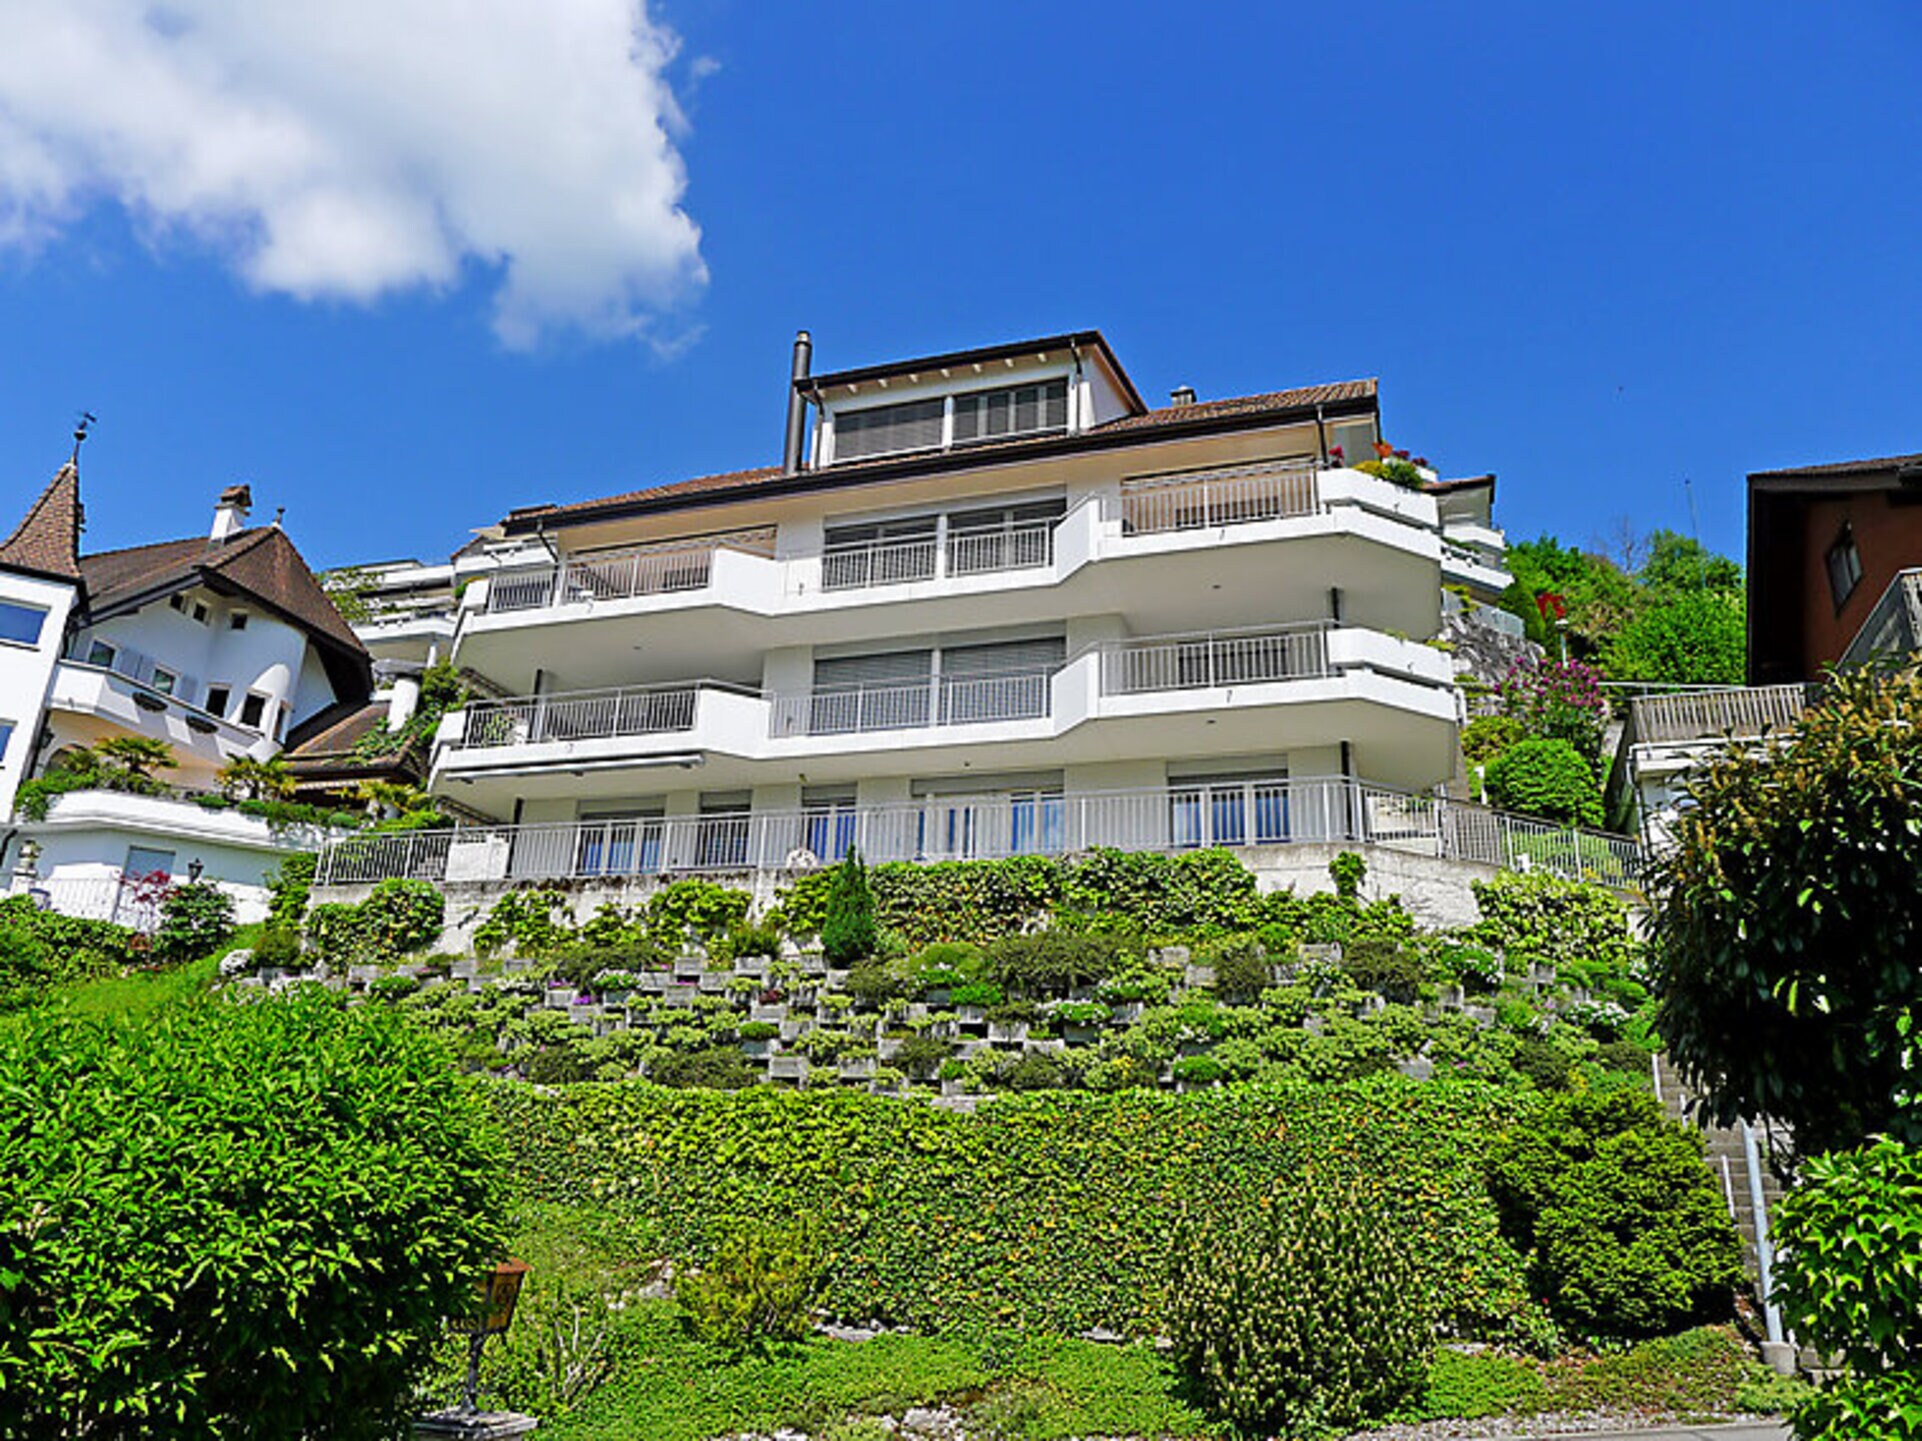 Property Image 1 - Property Manager Villa with First Class Amenities, Nidwalden Villa 1001